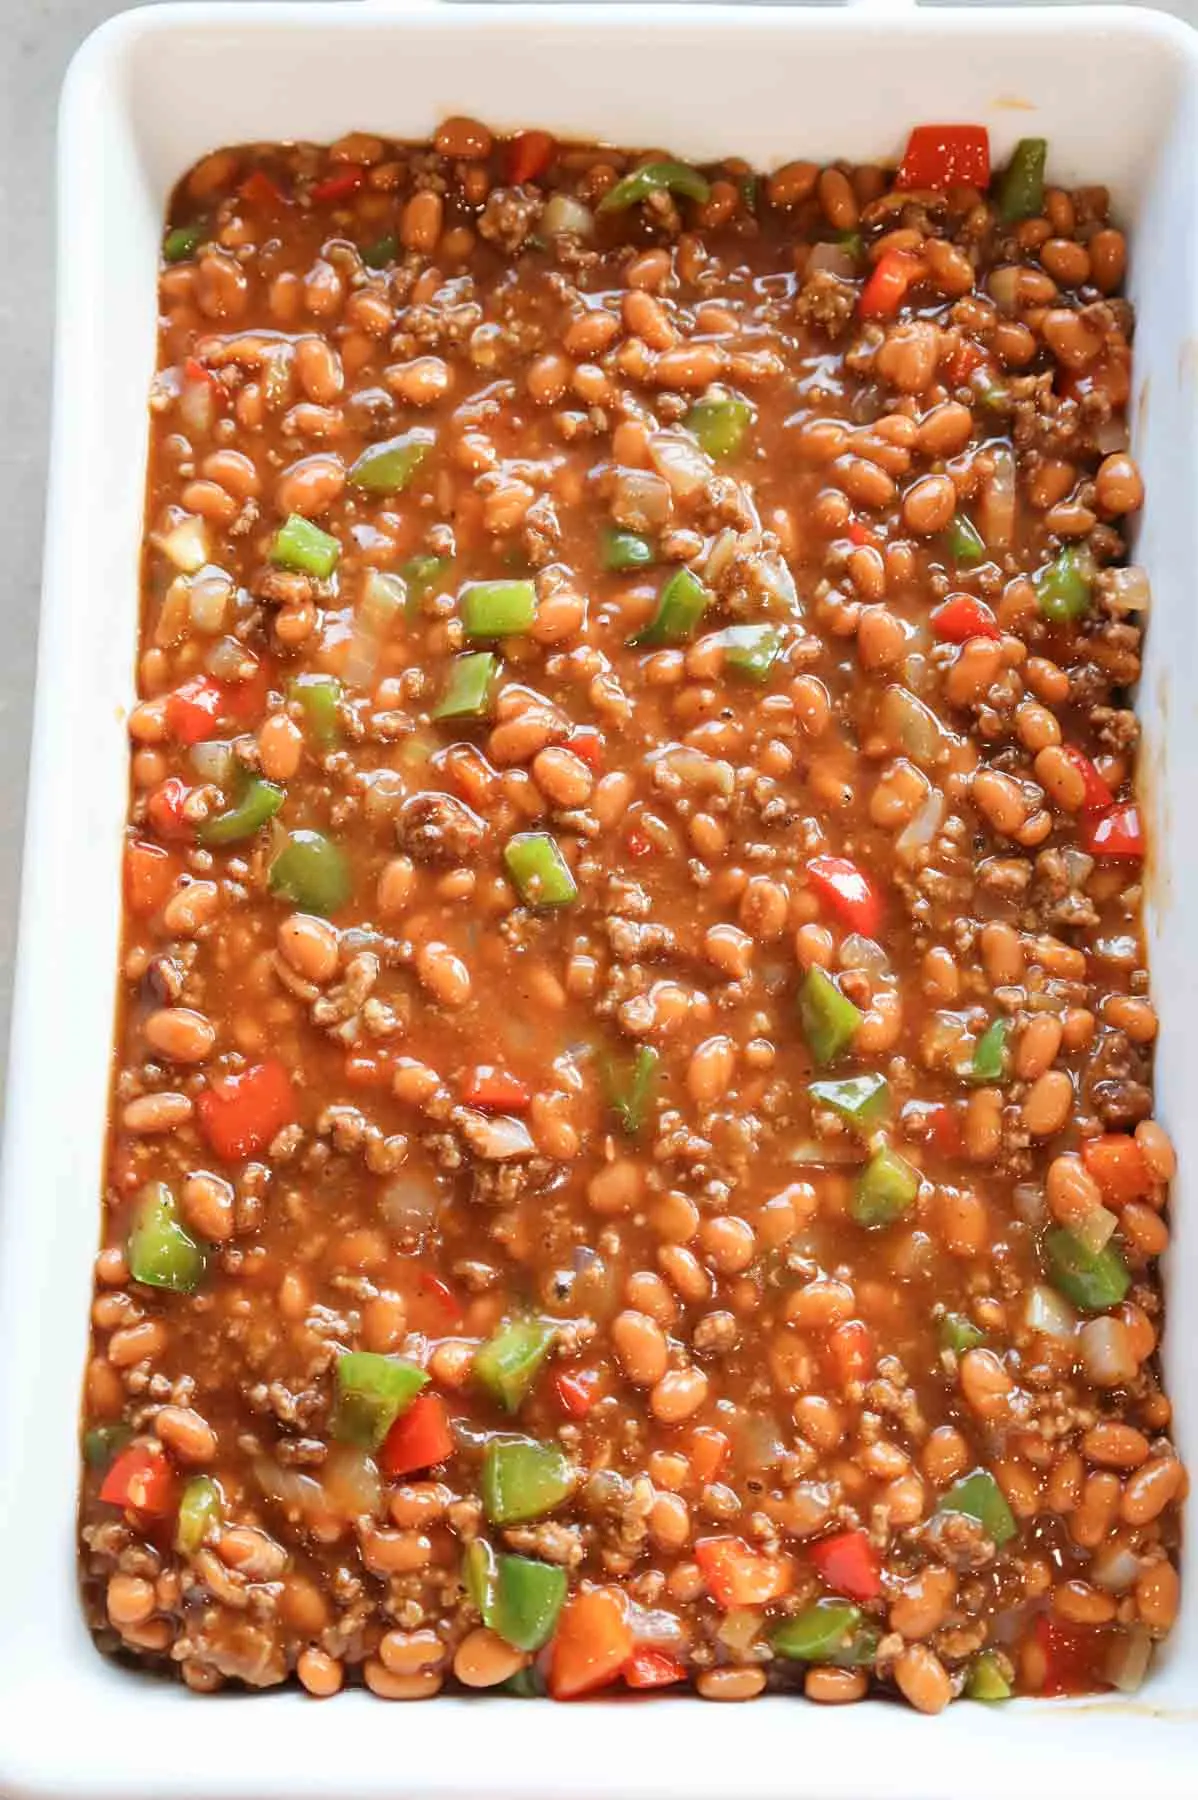 ground beef, bell peppers, baked bean and barbecue sauce mixture in a baking dish